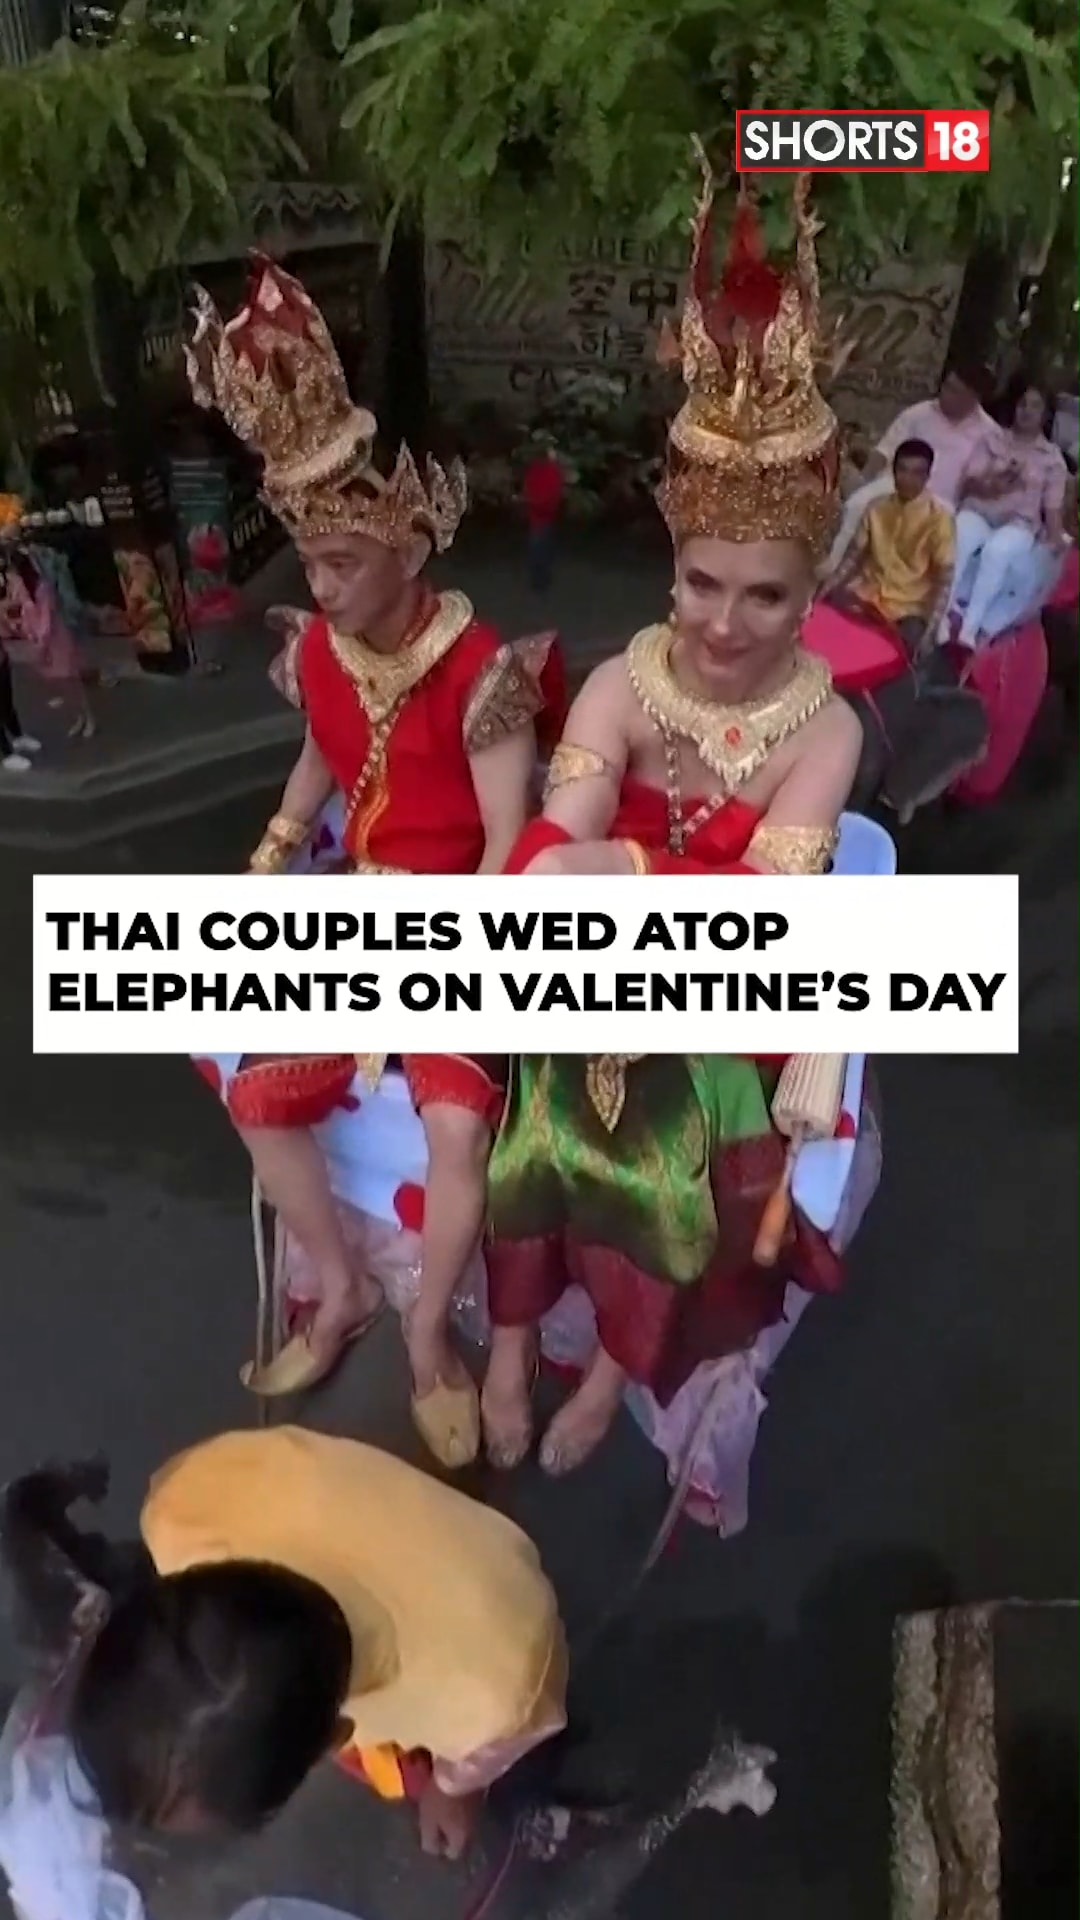 On Valentines Day, {couples} from Thailand trade vows atop elephants. – News18